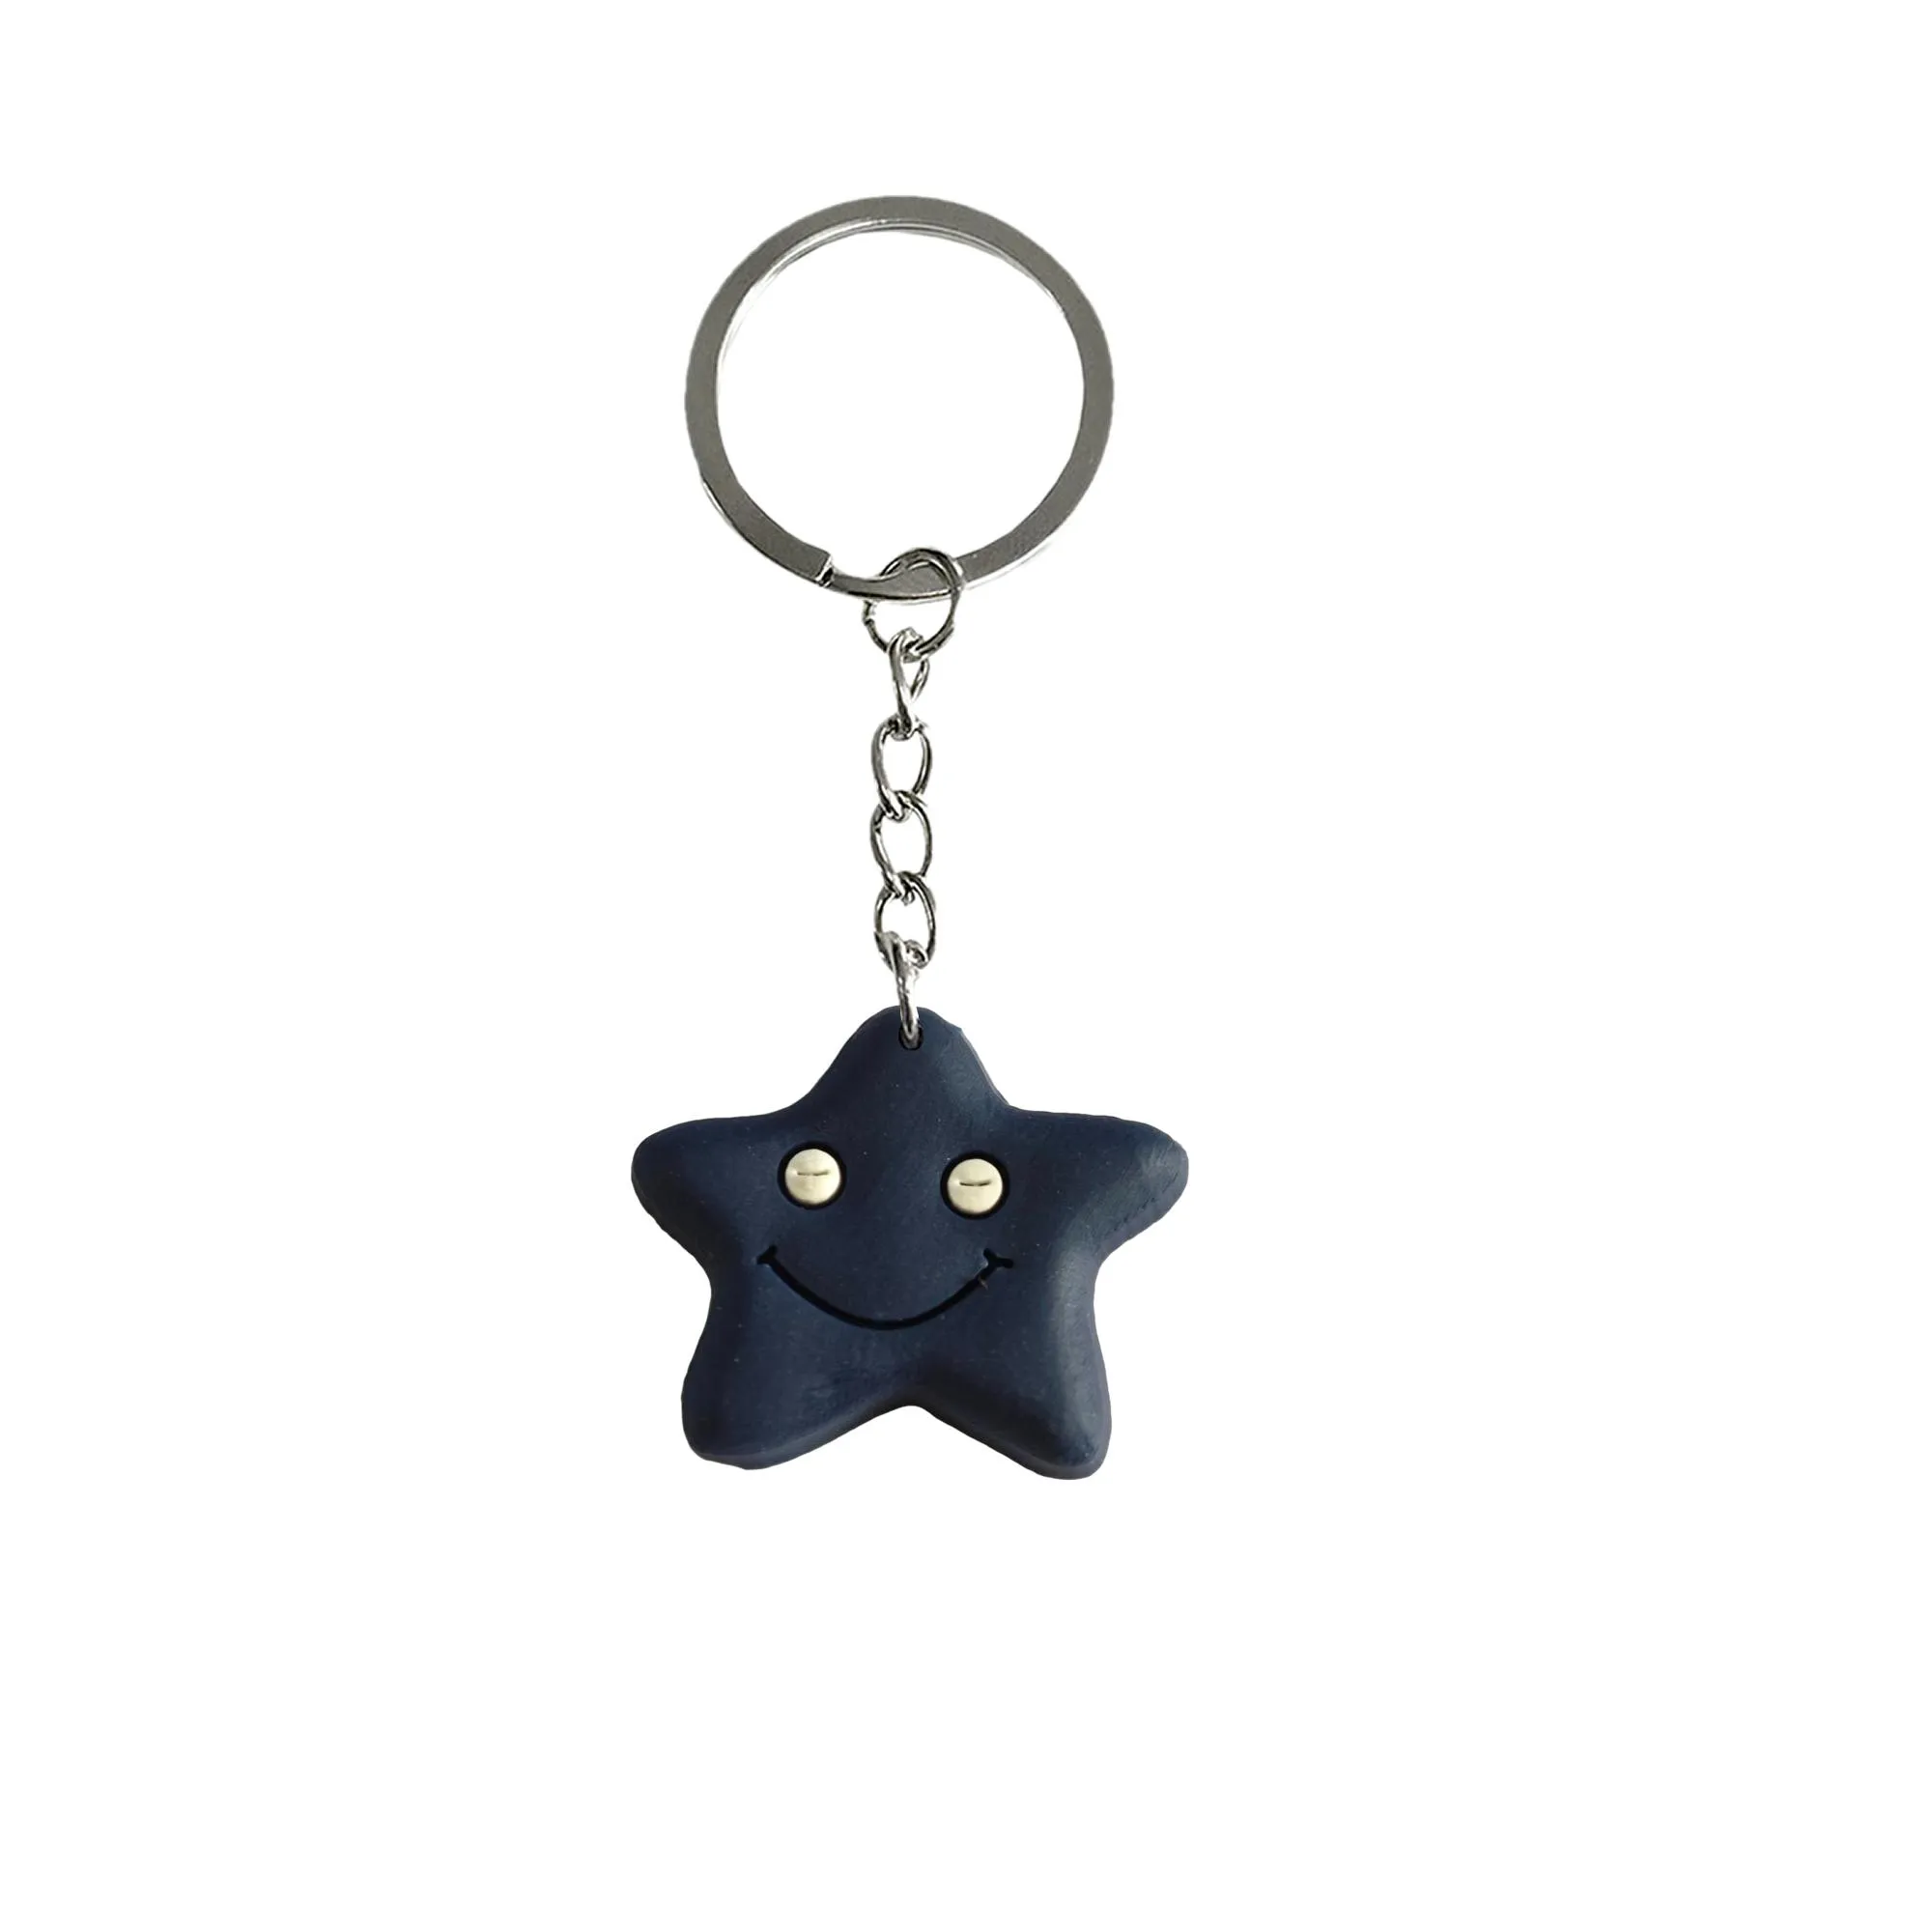 star keychain for goodie bag stuffers supplies keychains party favors keyring backpacks suitable schoolbag tags stuffer christmas gifts school bags backpack